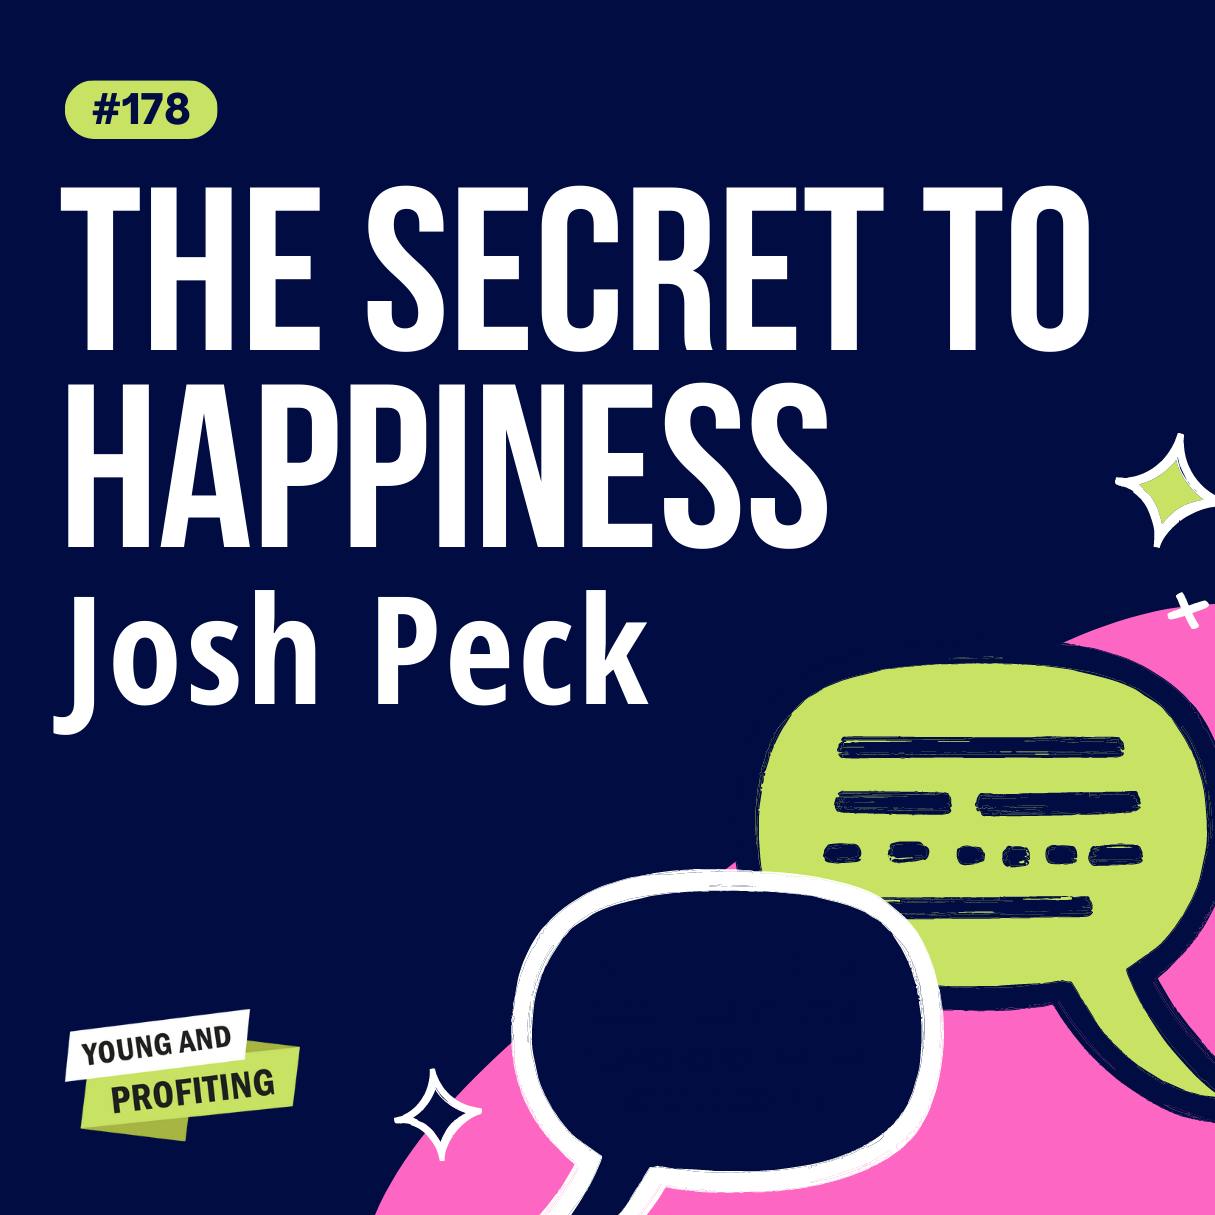 YAPClassic: Josh Peck on Shedding Limiting Beliefs and Overcoming Addiction to Find True Happiness